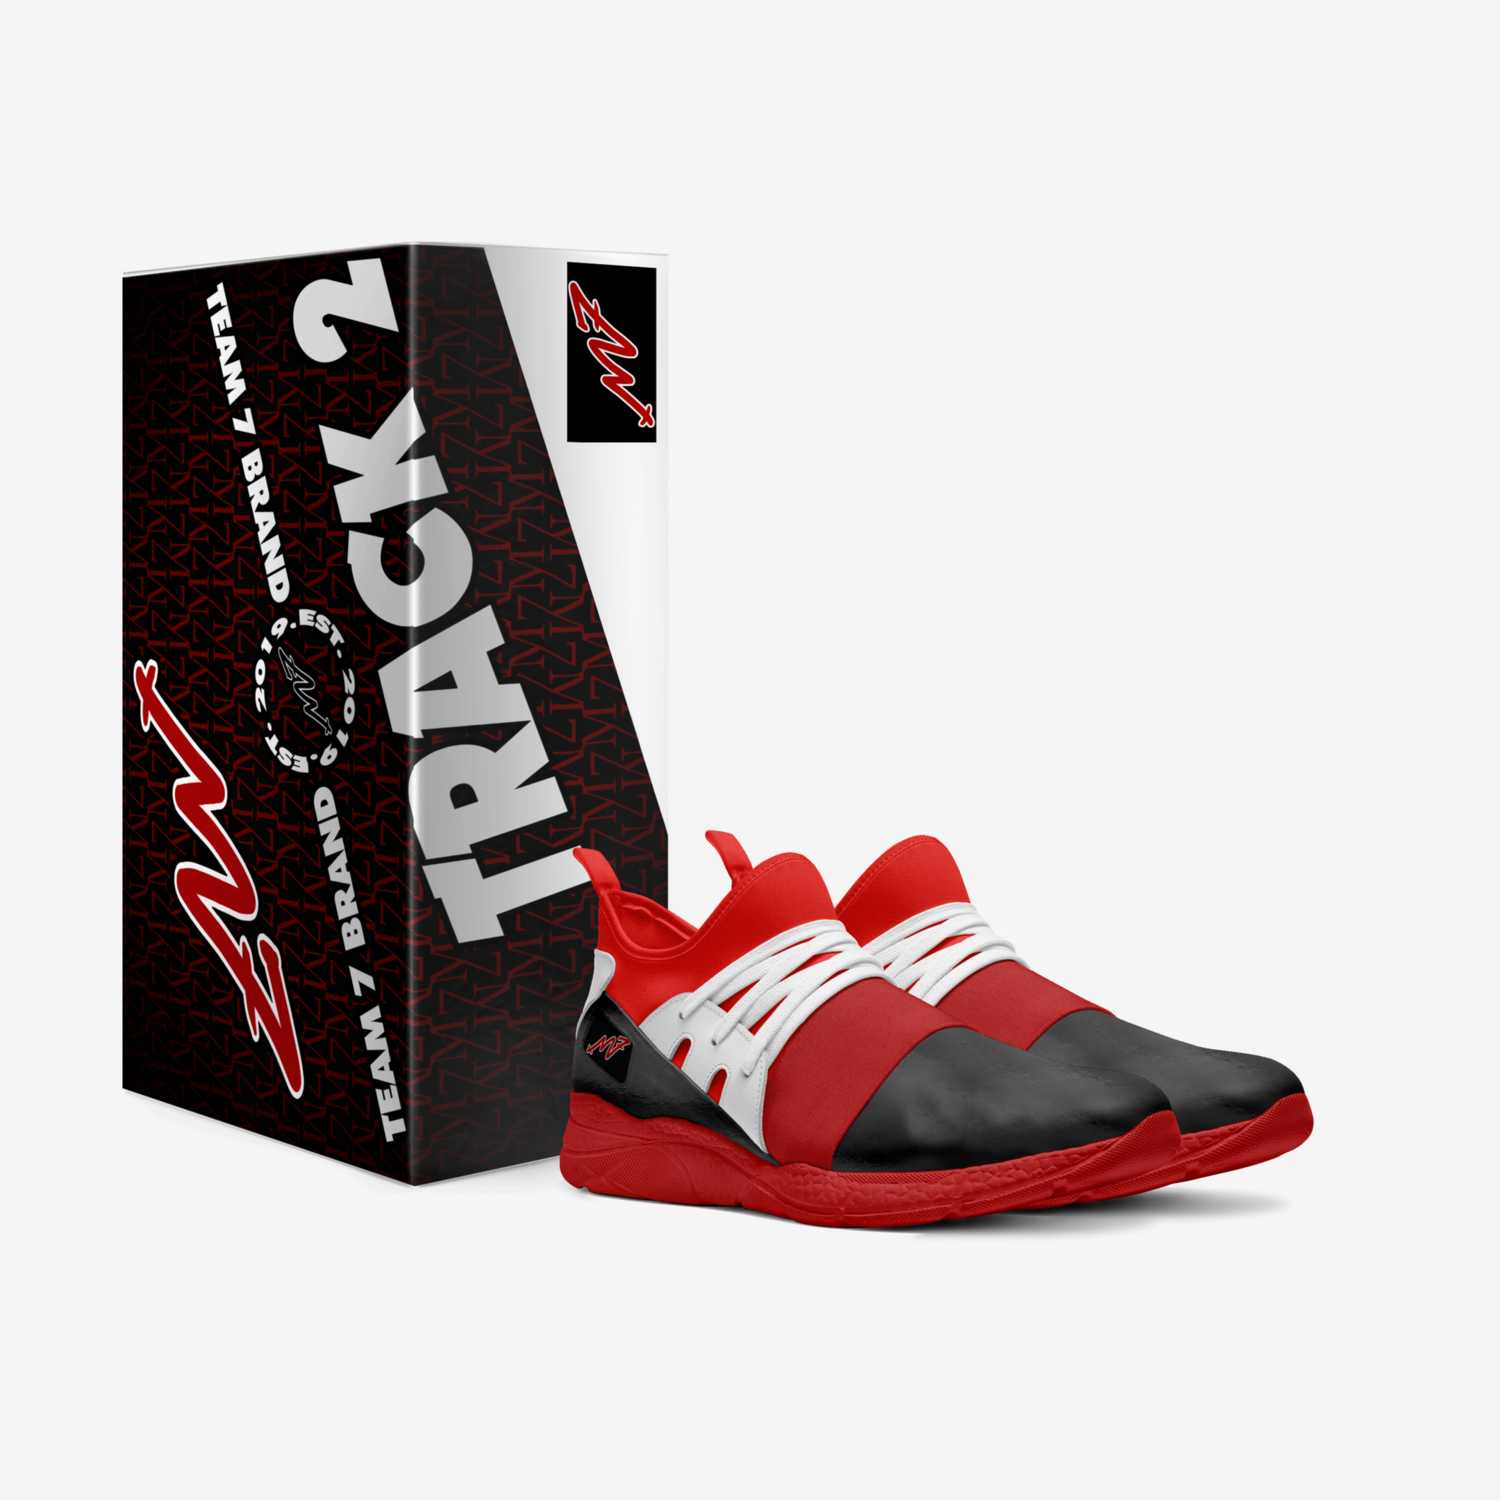 Track 2 custom made in Italy shoes by Team 7 Brand | Box view